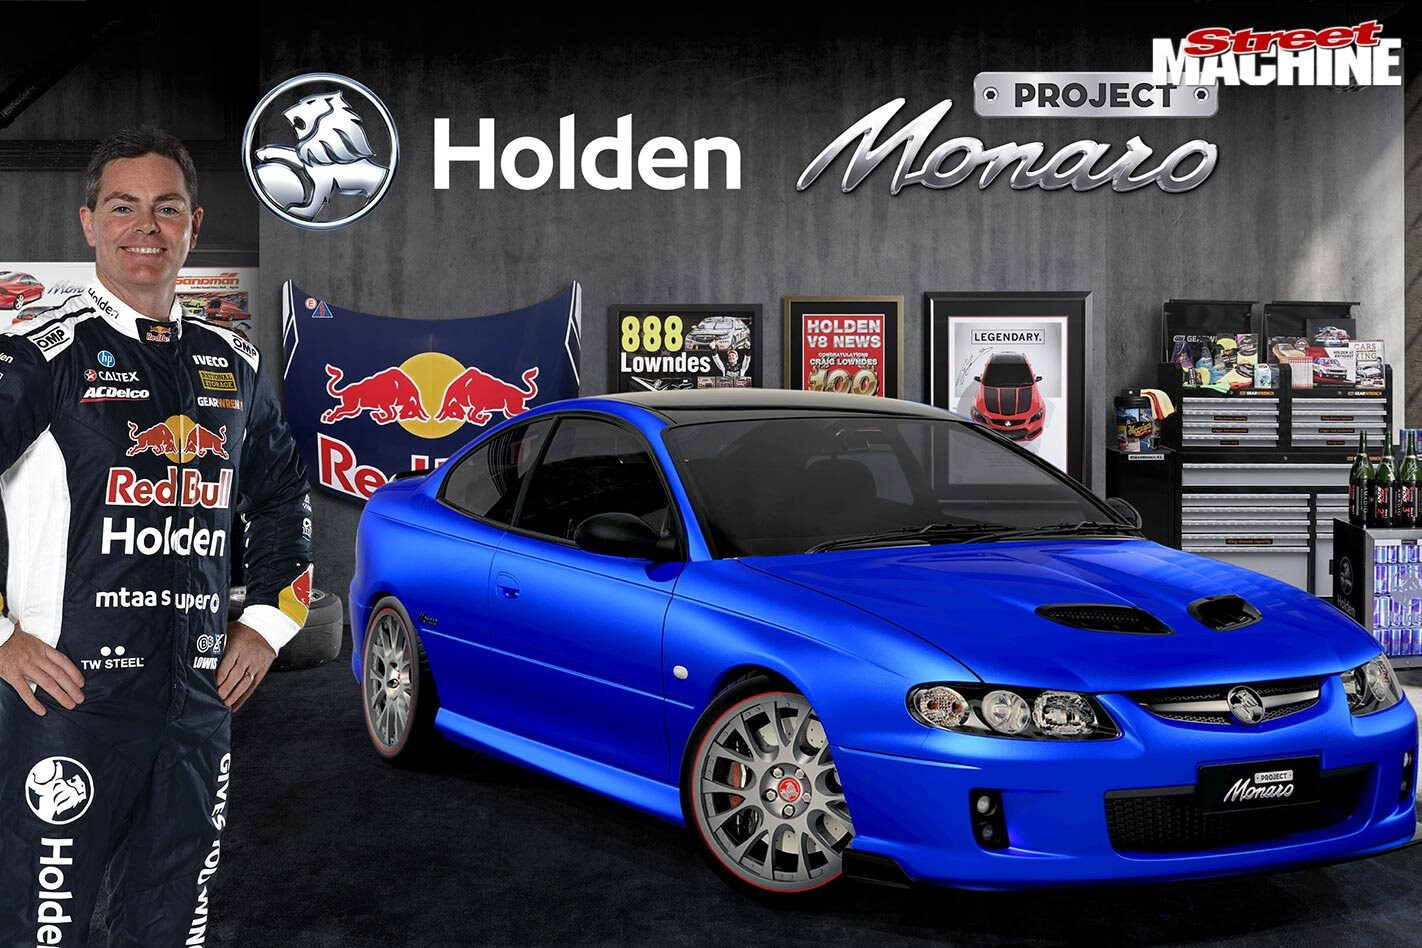 Craig Lowndes and Holden launch Project Monaro